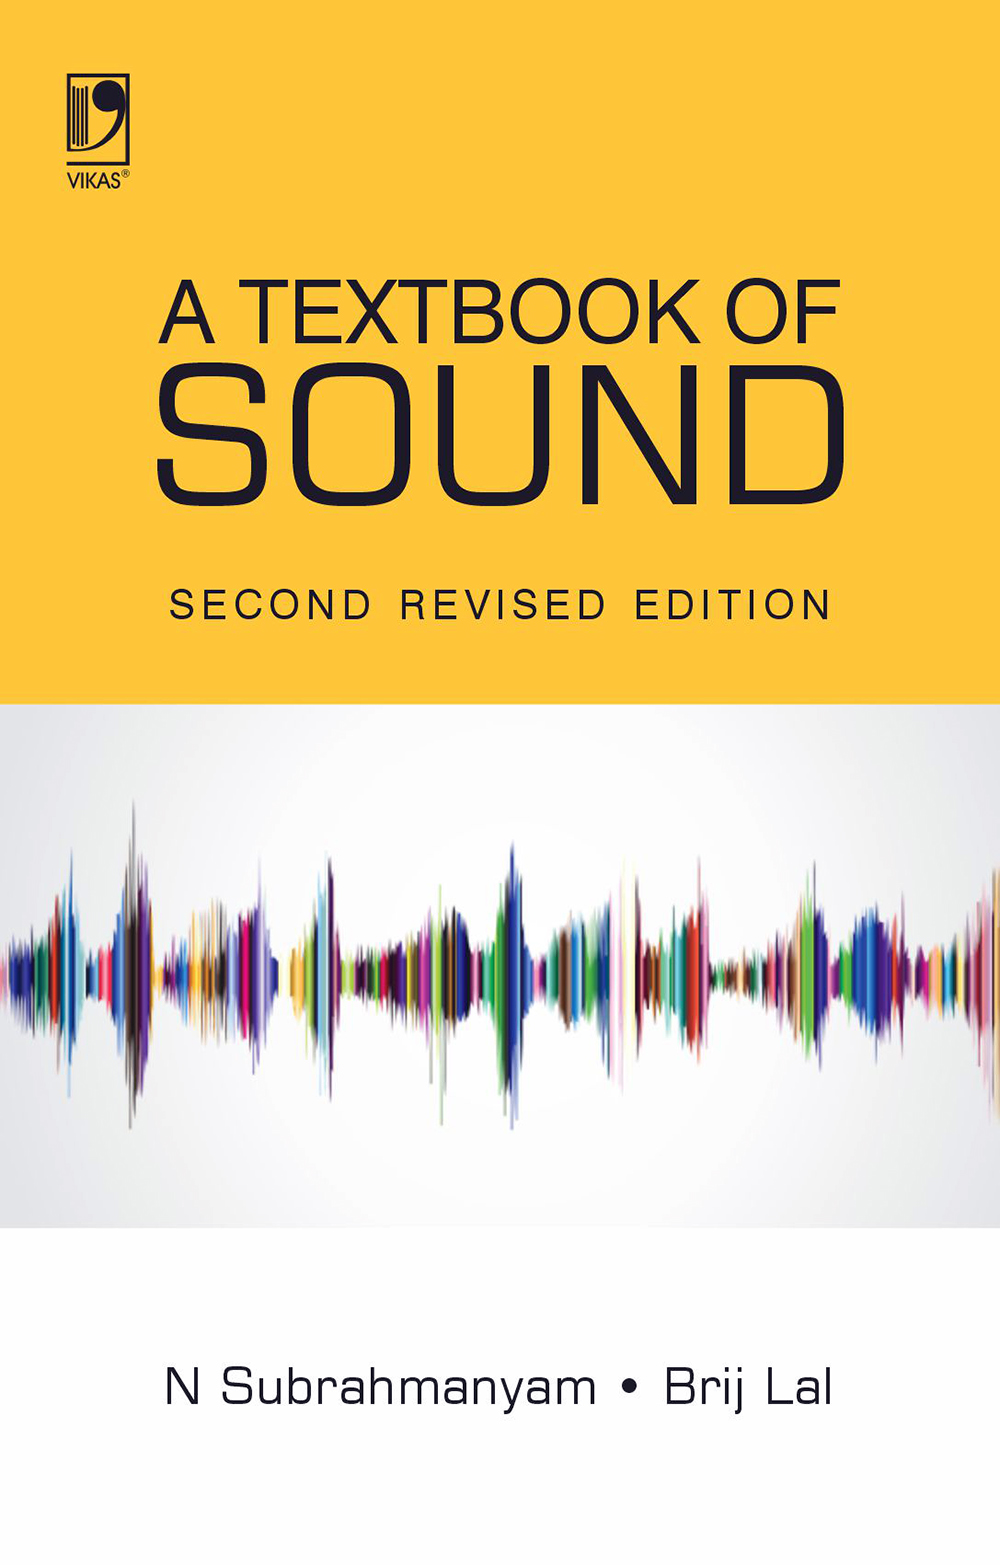 a-textbook-of-sound-author-brij-lal-n-subrahmanyam-publisher-s-chand-co-ltd2021-07-25-054143.jpg